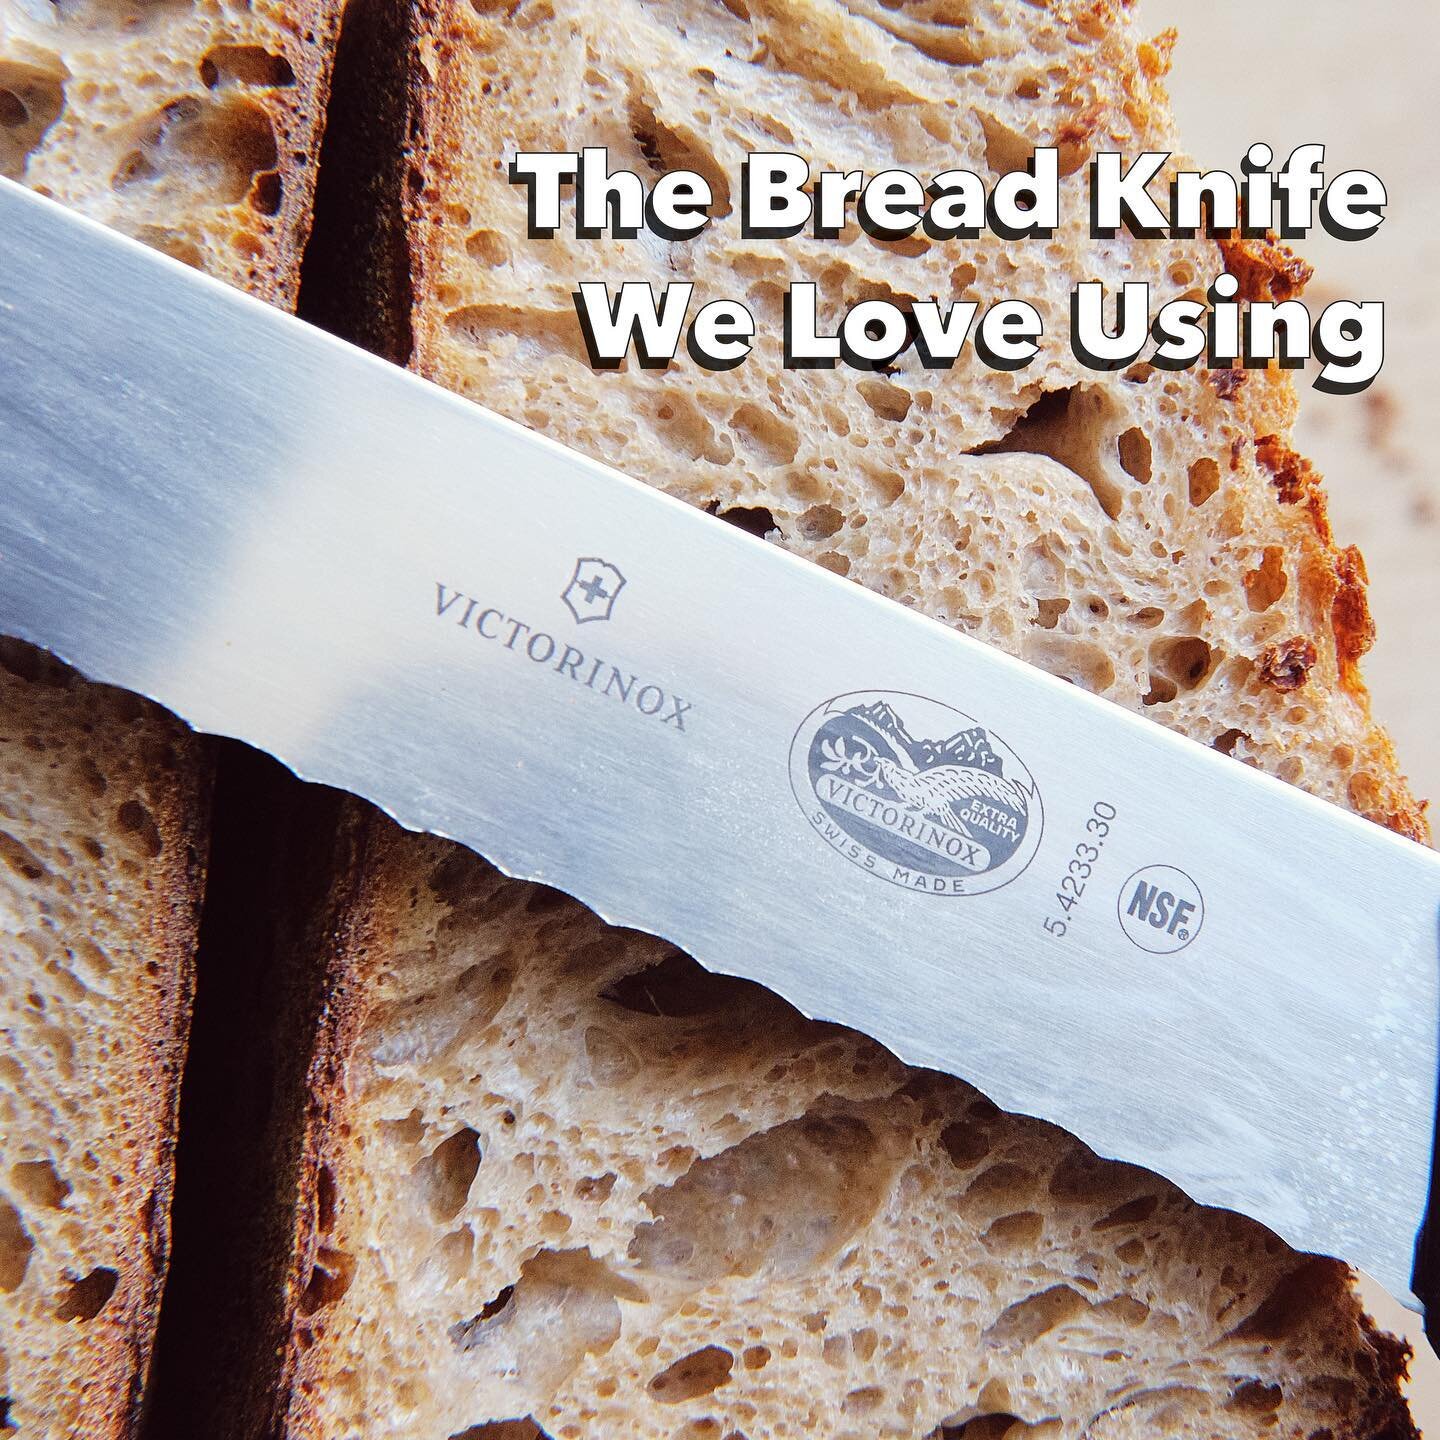 Hey Folks!

We (@rdaphoto) will be posting a video tonight on our YouTube Channel &lsquo;Nadia and Rob&rsquo; reviewing a bread knife we recently purchased out of necessity since we bake and need to showcase a lot of bread. 

If your curious on what 